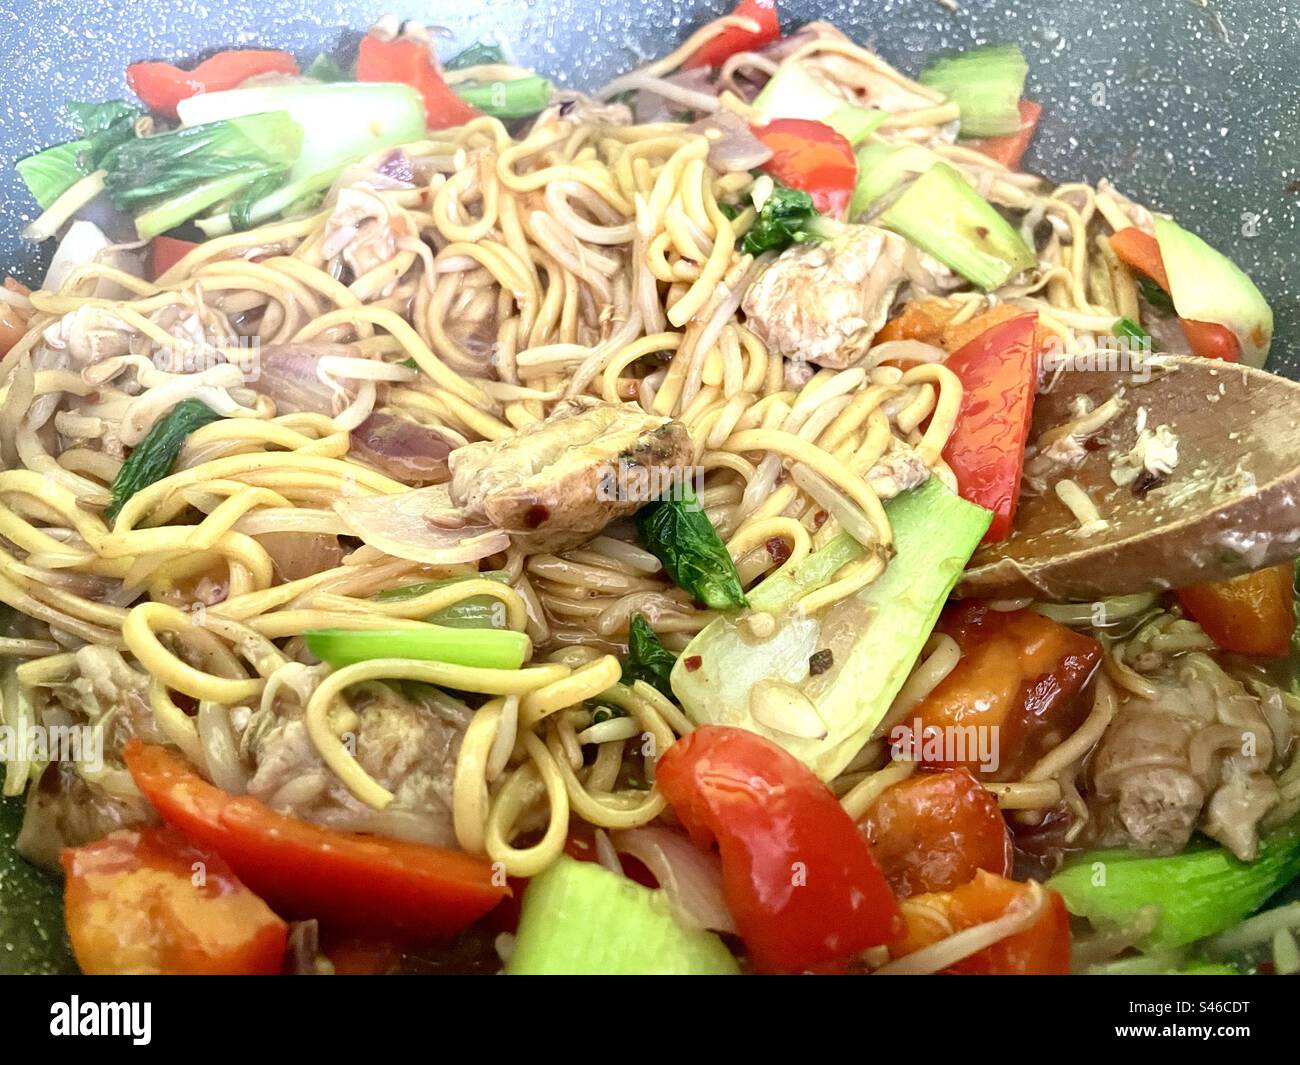 Vegetable and fungi chow mein. Stock Photo